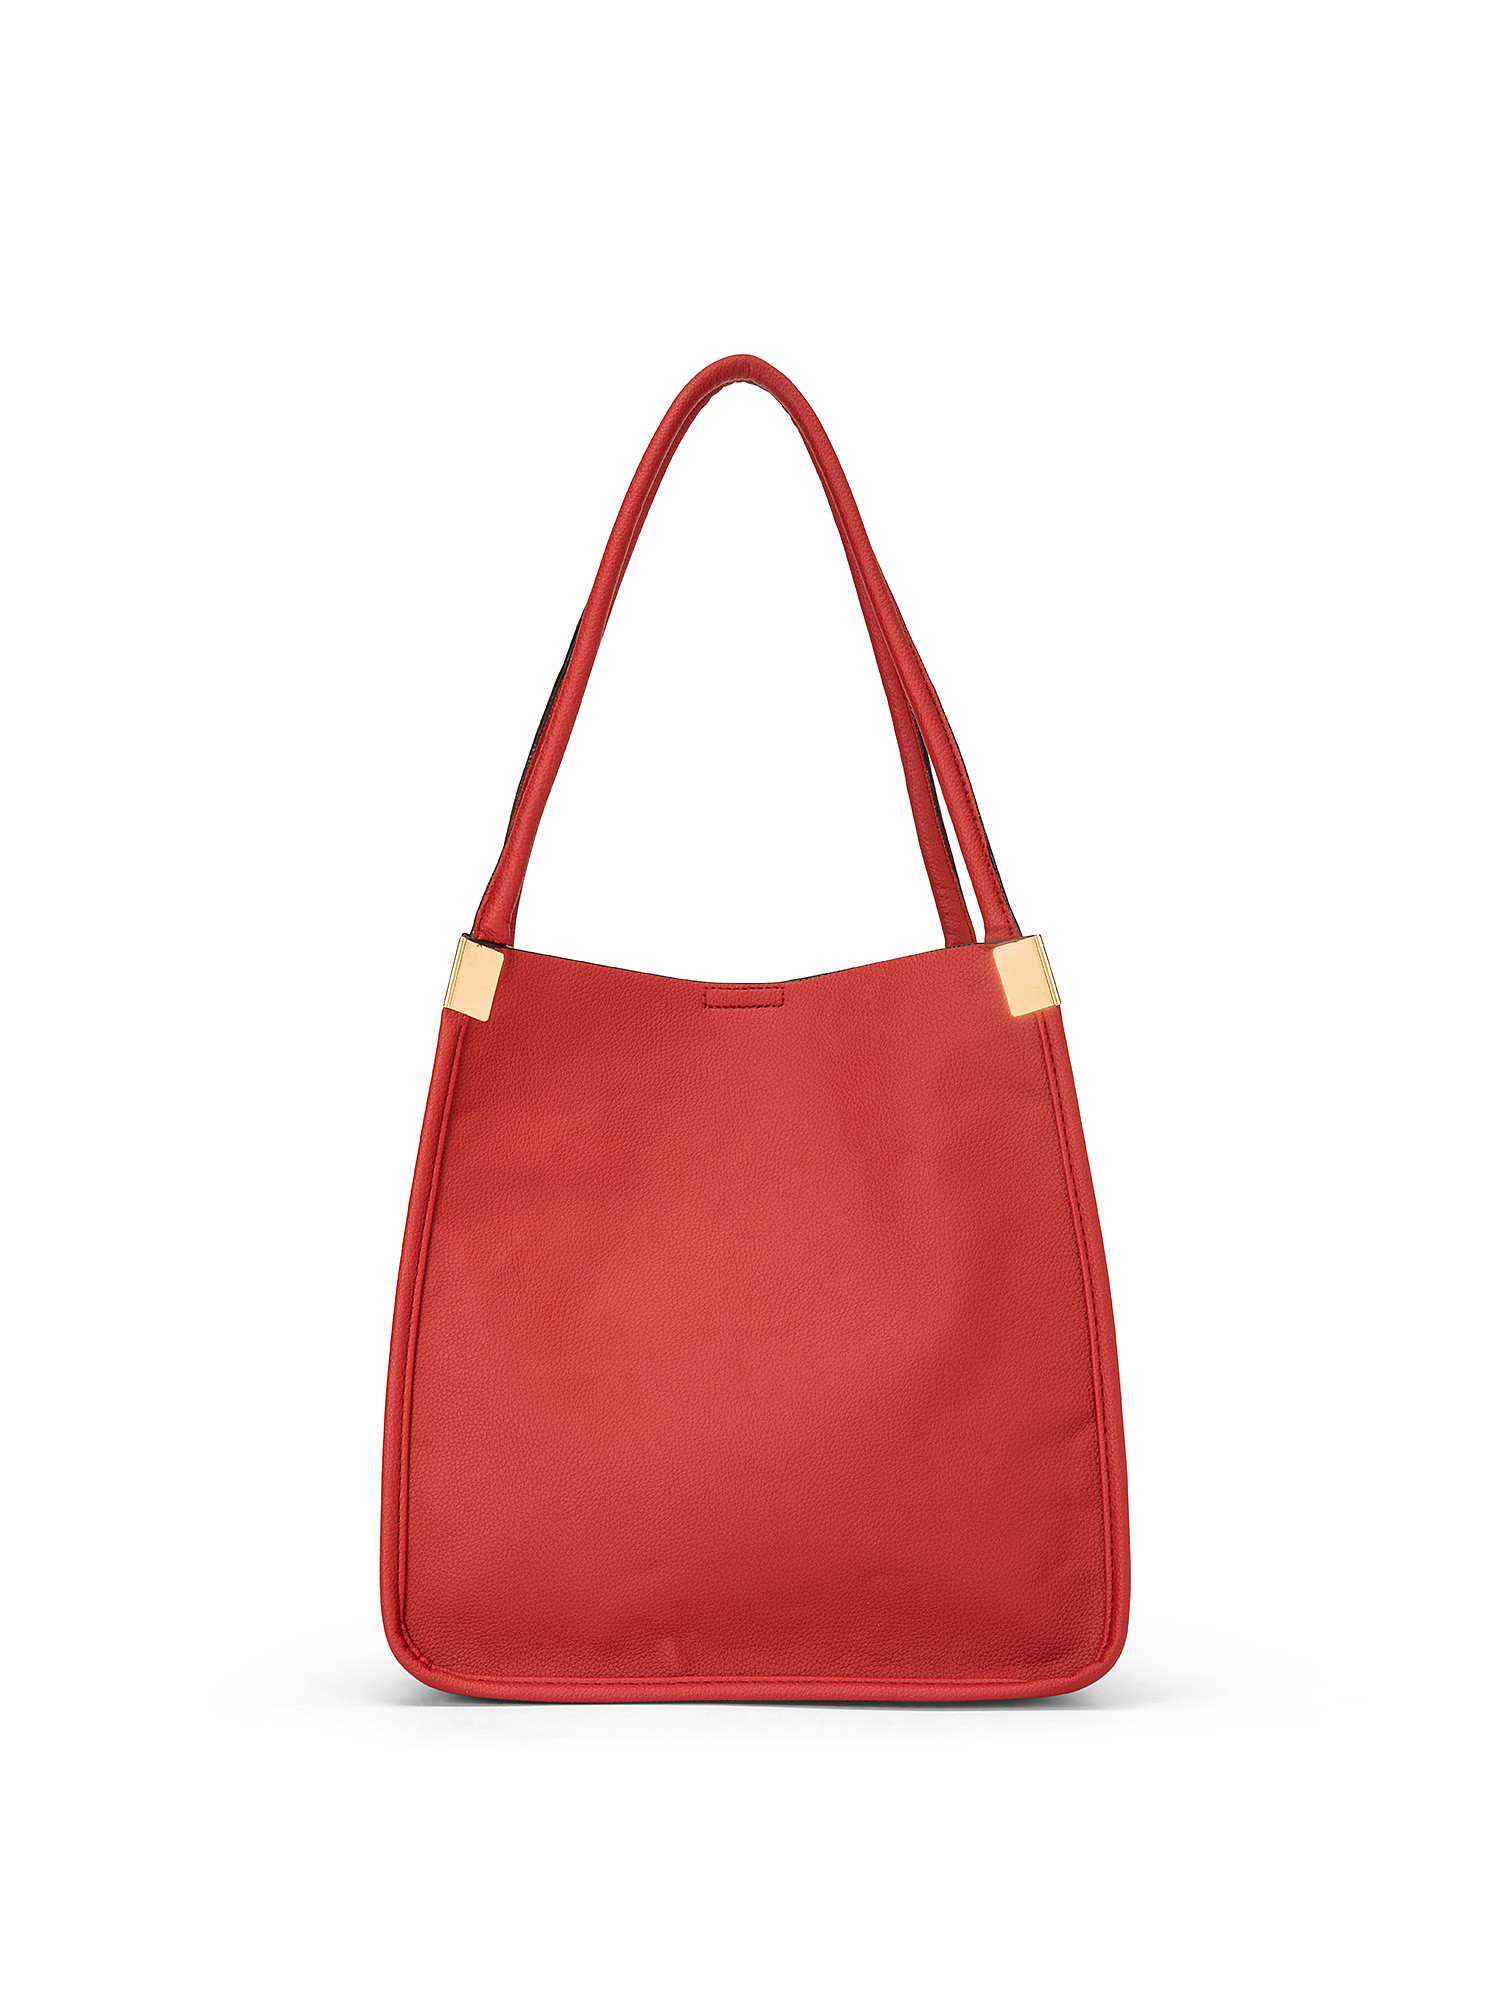 Shopping bag, Rosso, large image number 0